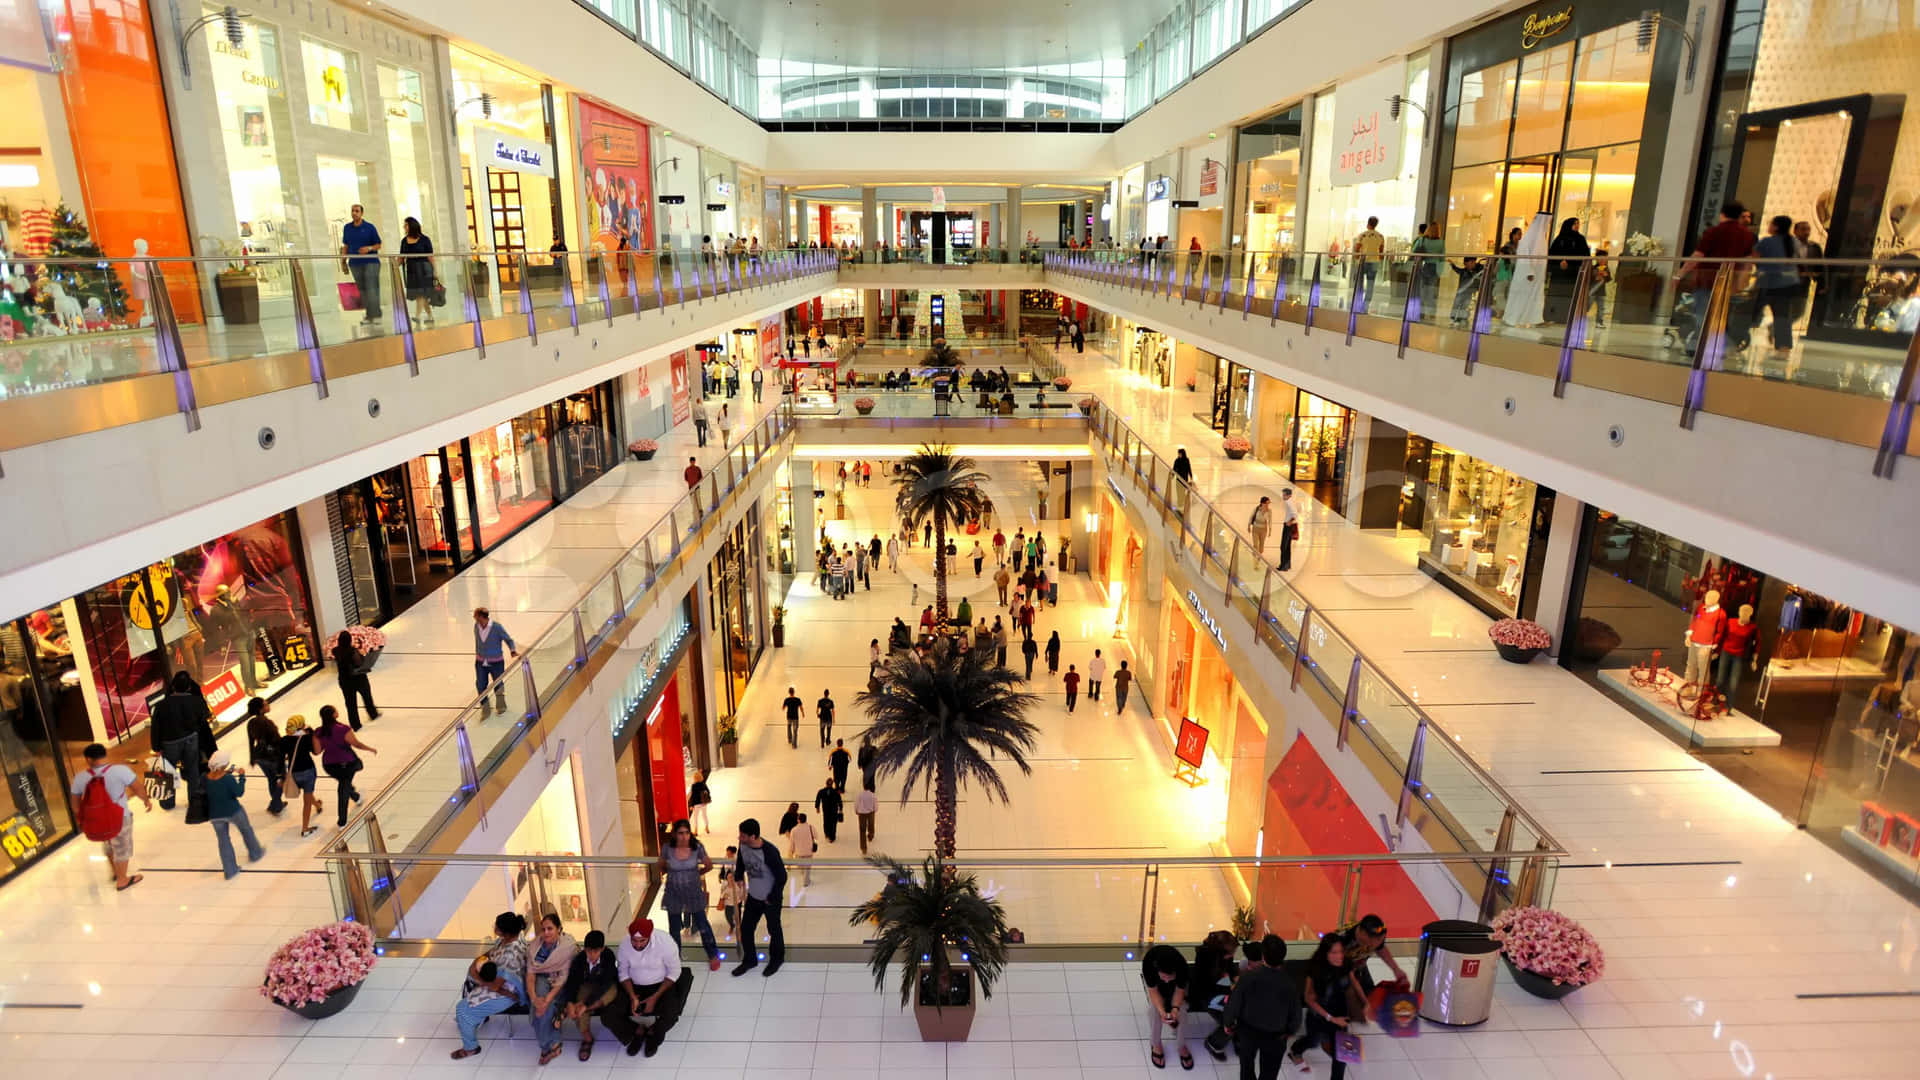 Bustling and vibrant shopping mall interior